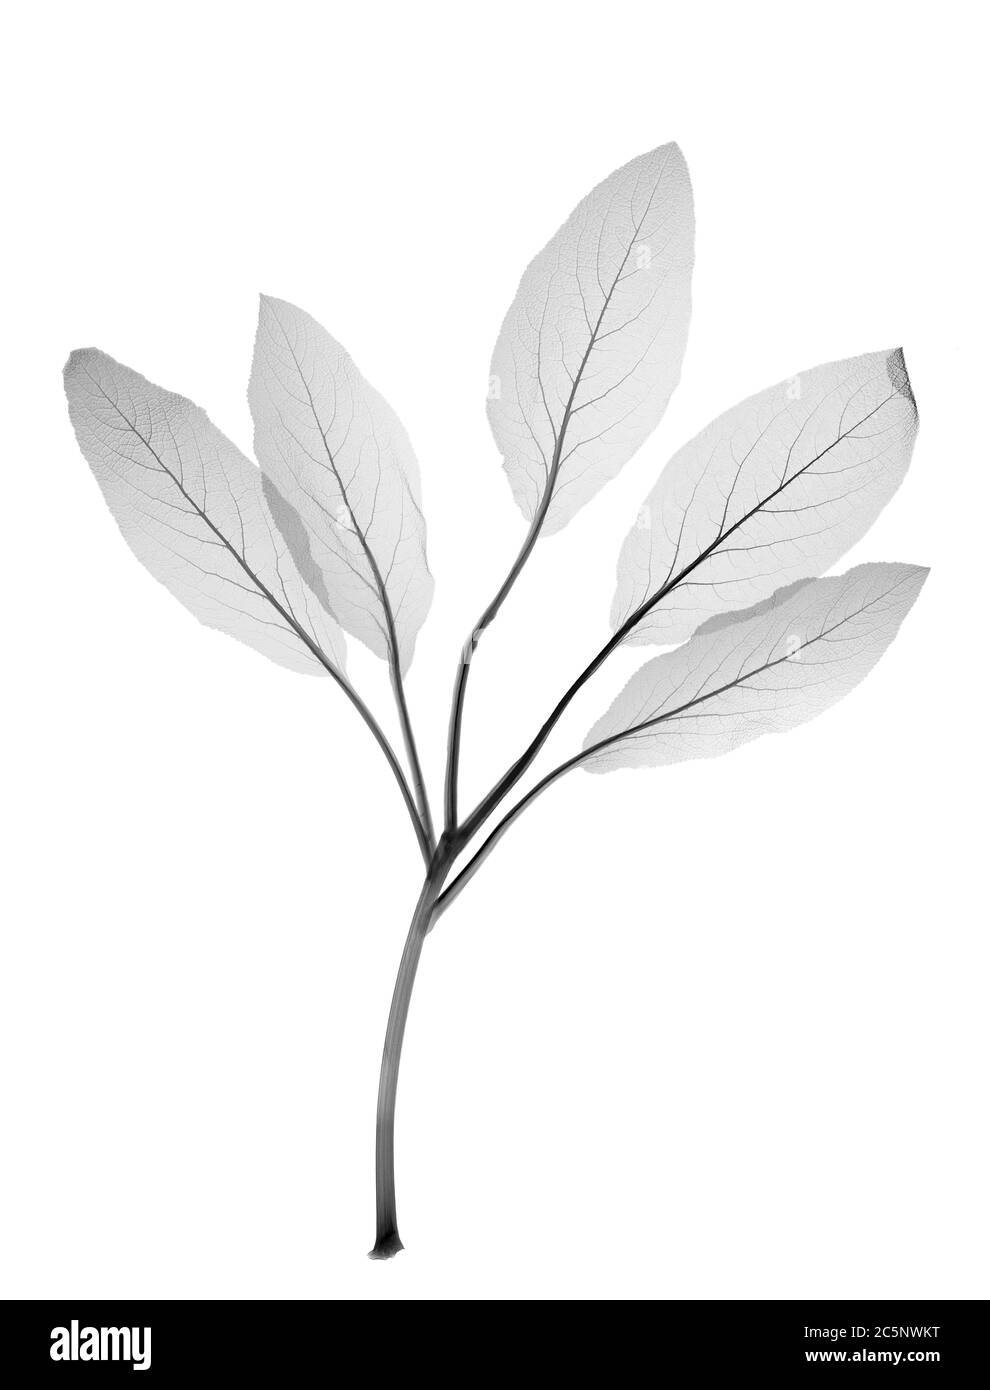 Five starchy leaves, X-ray. Stock Photo